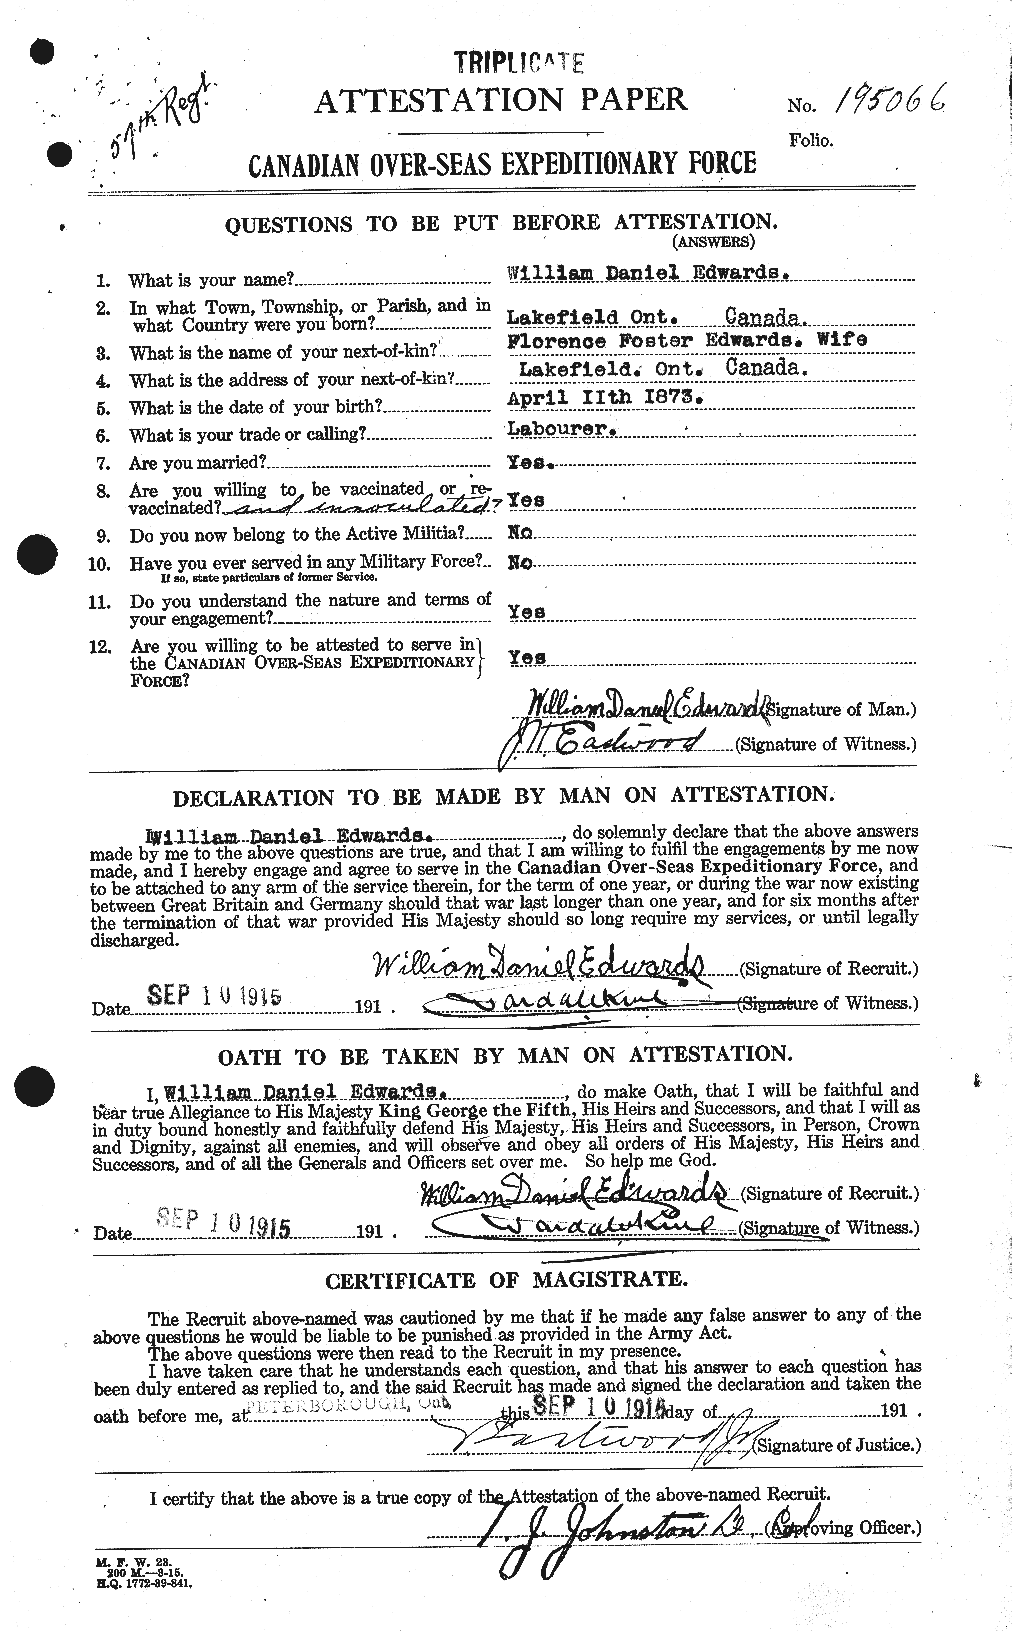 Personnel Records of the First World War - CEF 310418a